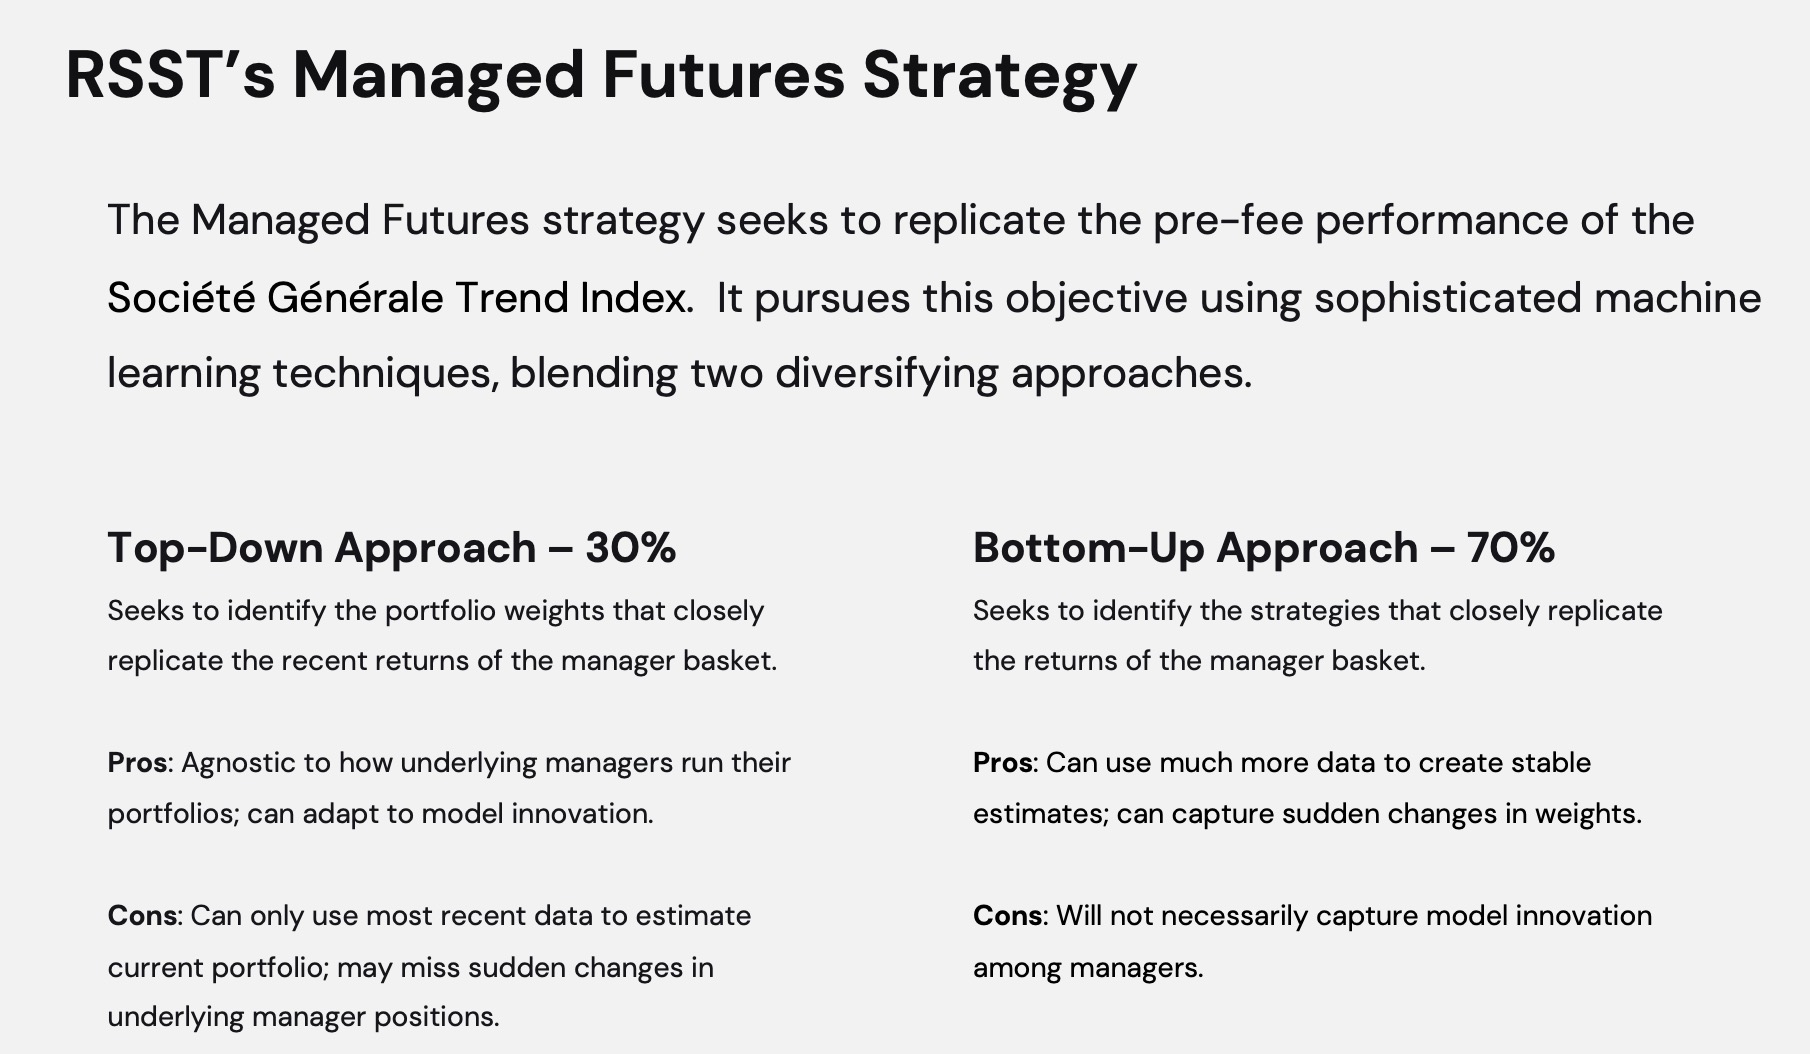 RSST ETF: Managed Futures Strategy With A Top-Down Approach at 30% and Bottom-Up Approach at 70% for Return Stacked US Stocks and Managed Futures ETF 